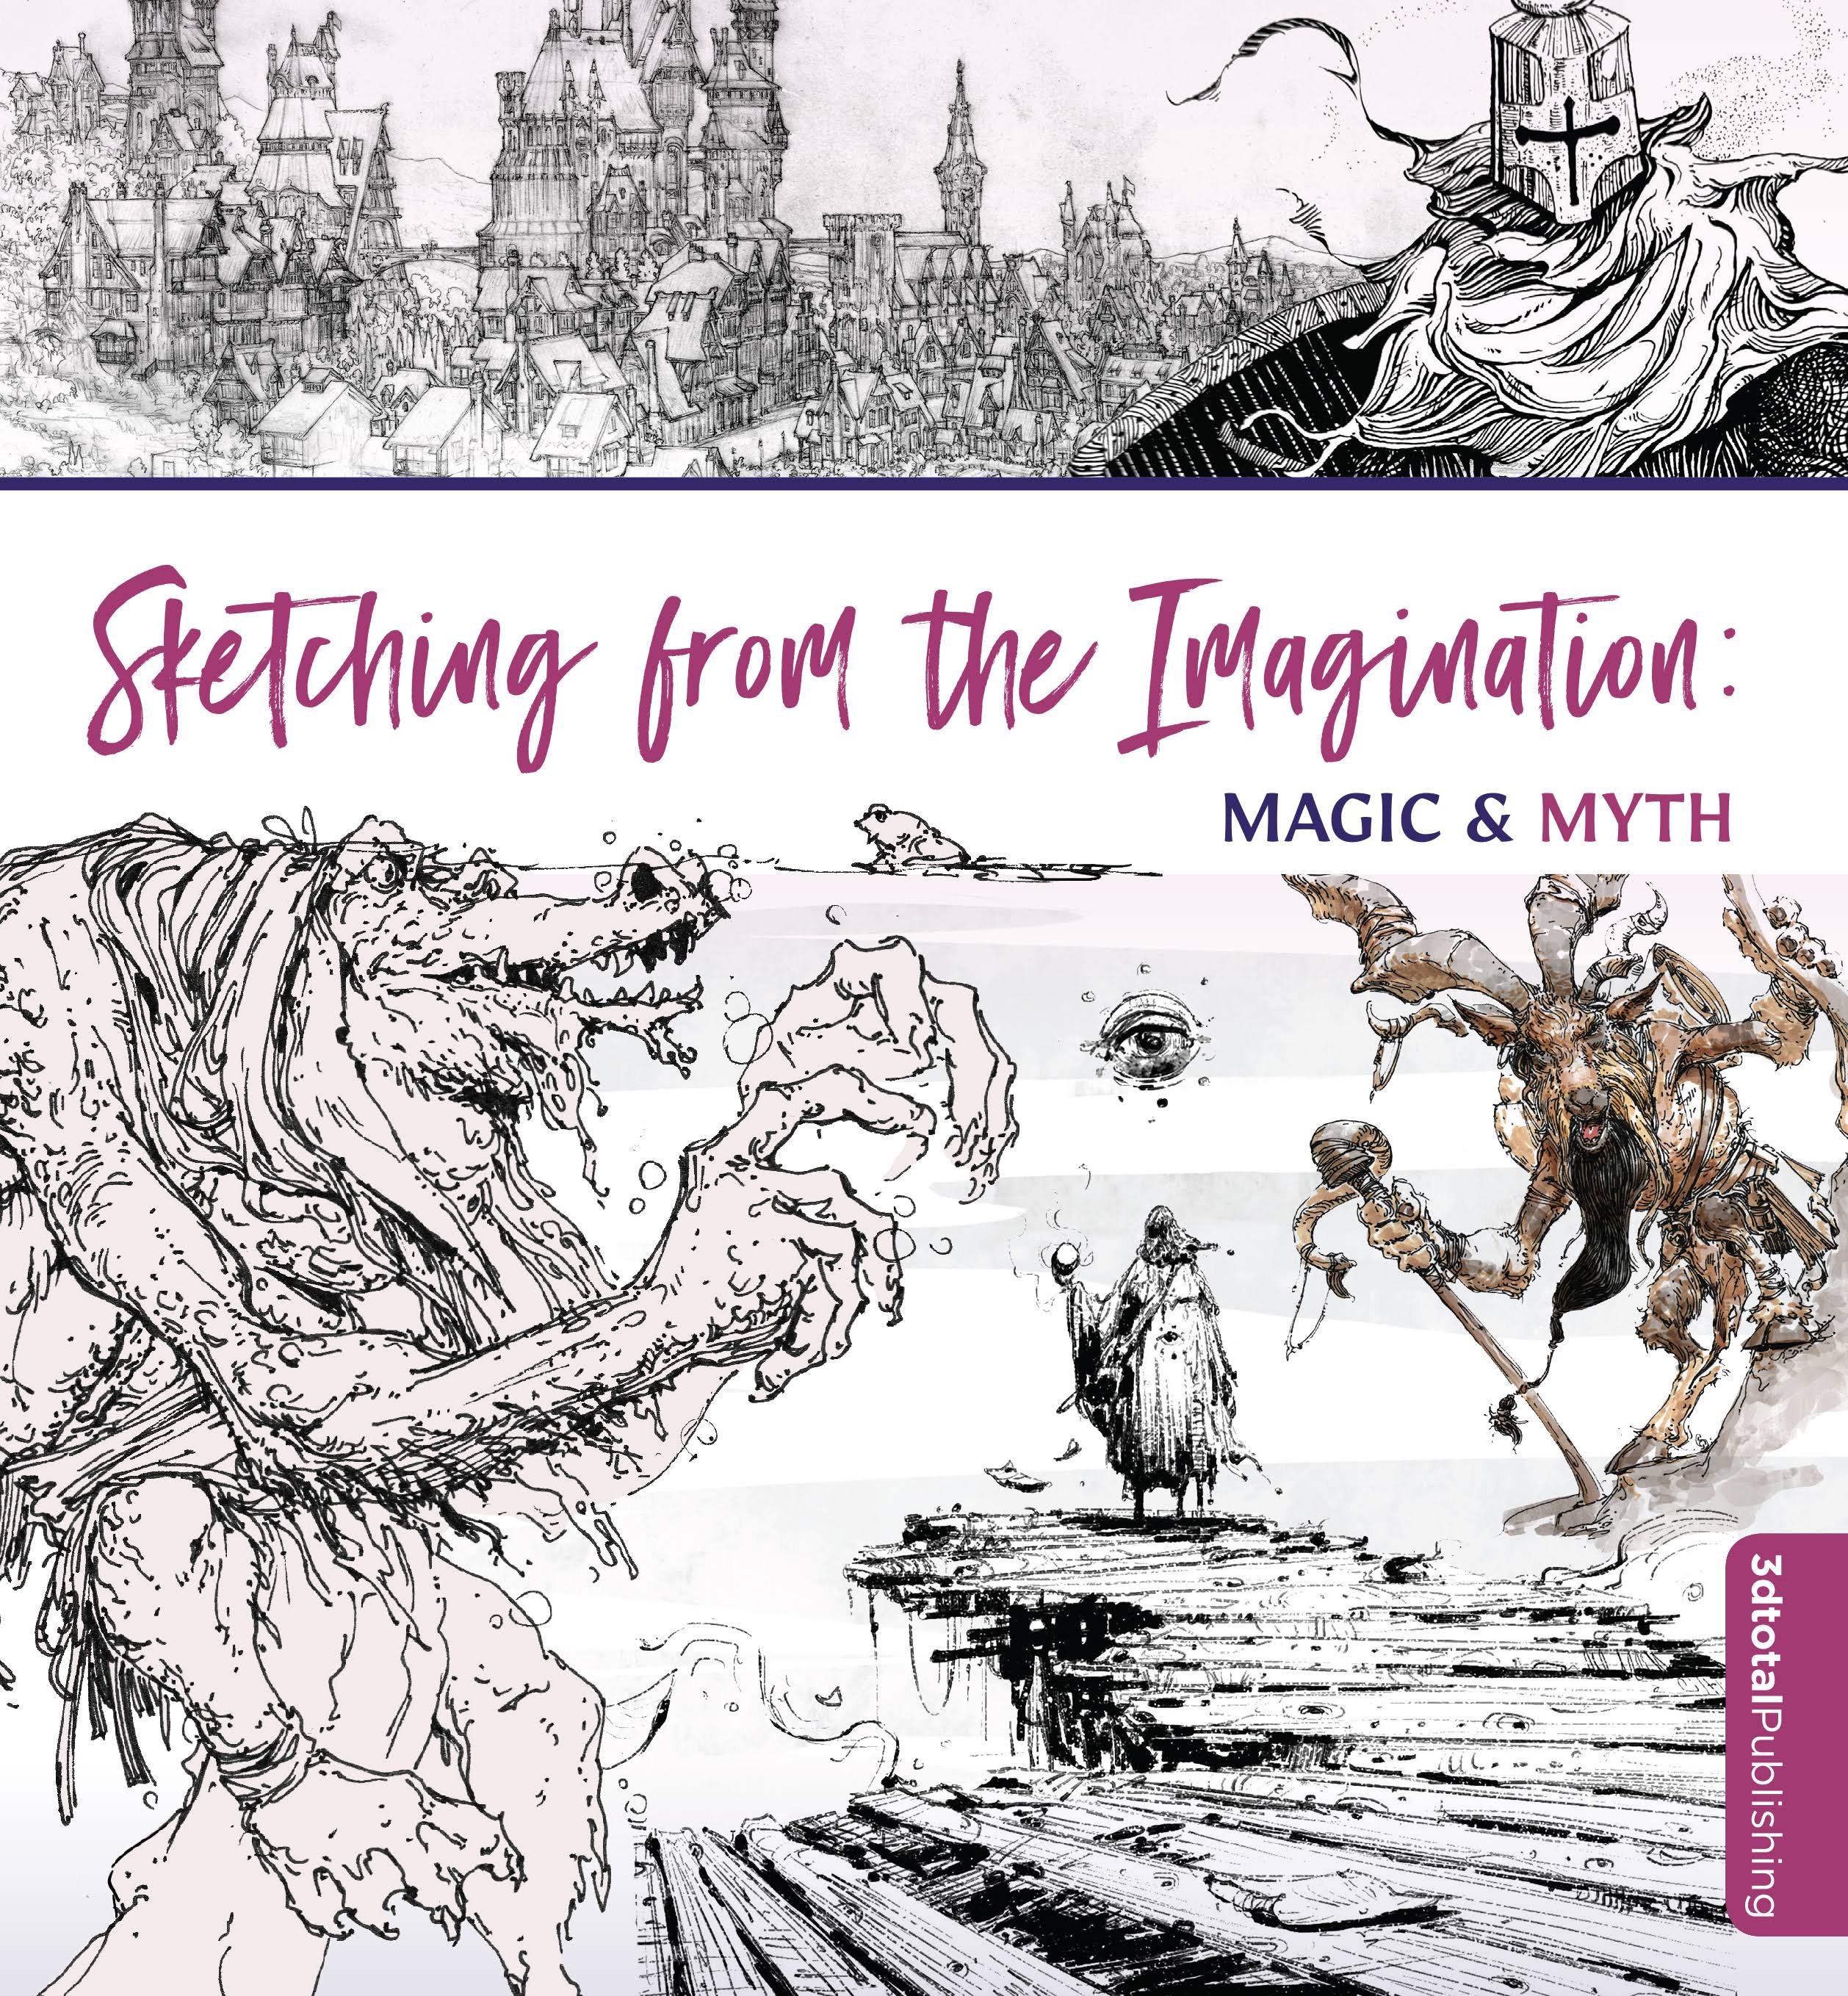 Sketching from the Imagination: Magic and Myth [Book]